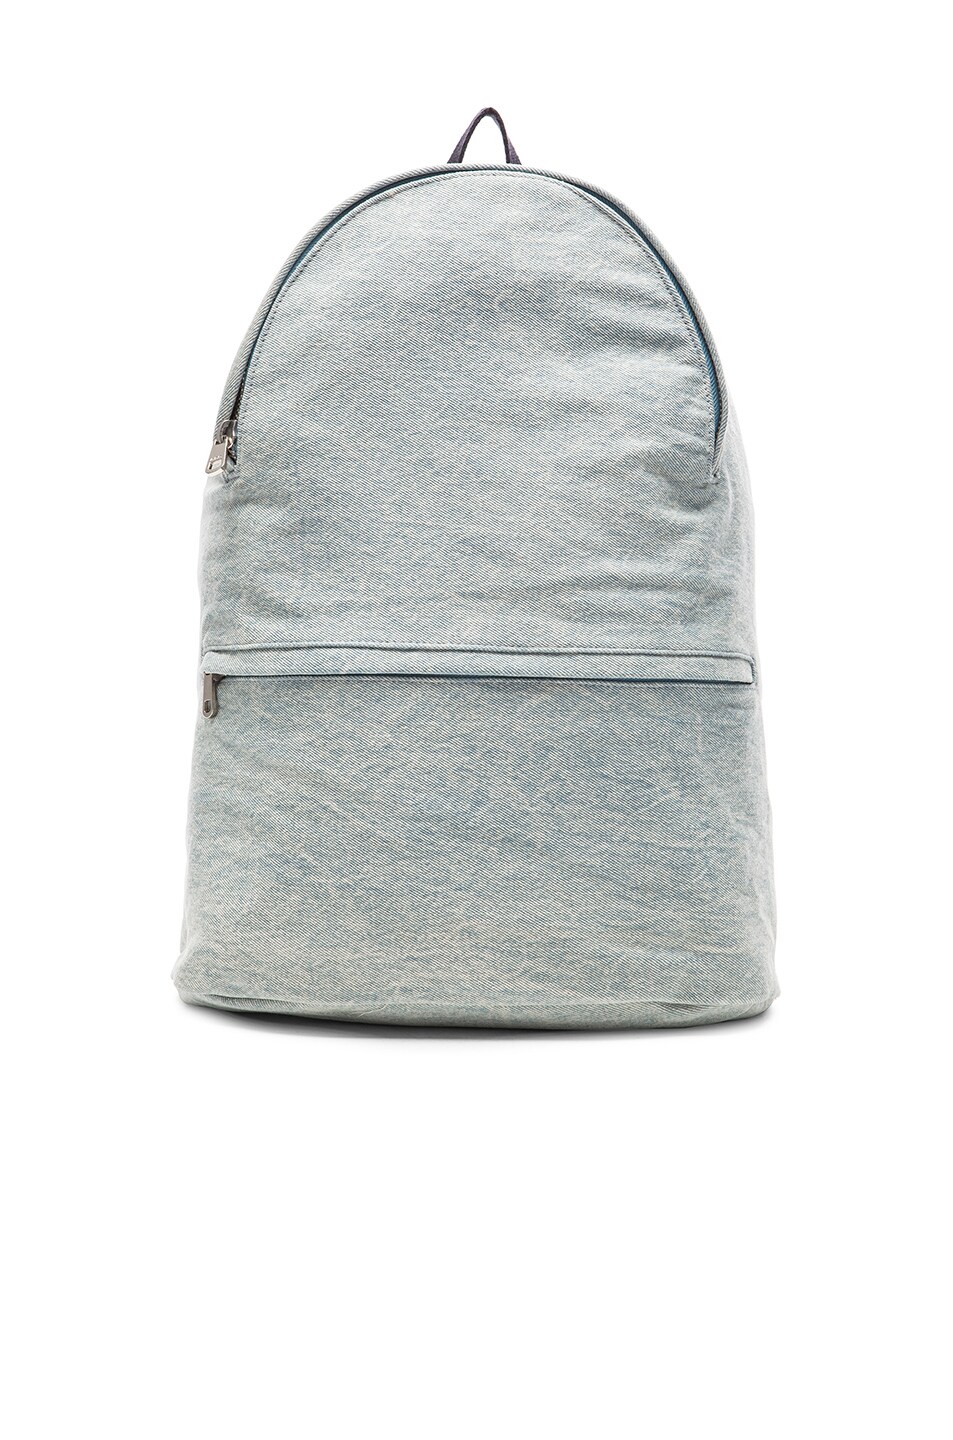 Image 1 of A.P.C. Billy Backpack in Indigo Delave